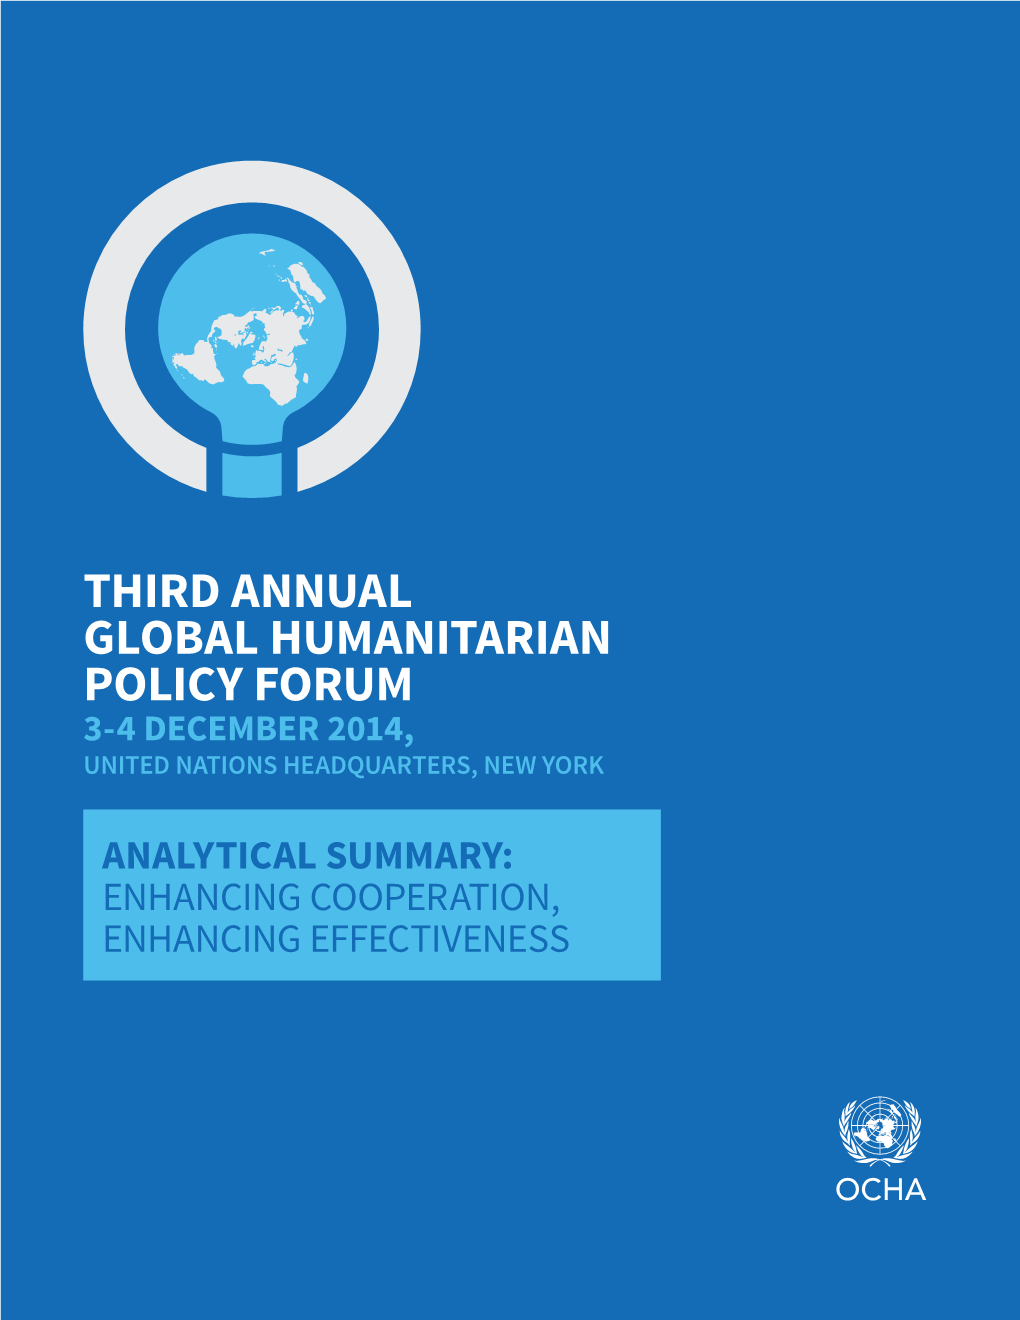 Third Annual Global Humanitarian Policy Forum 3-4 December 2014, United Nations Headquarters, New York